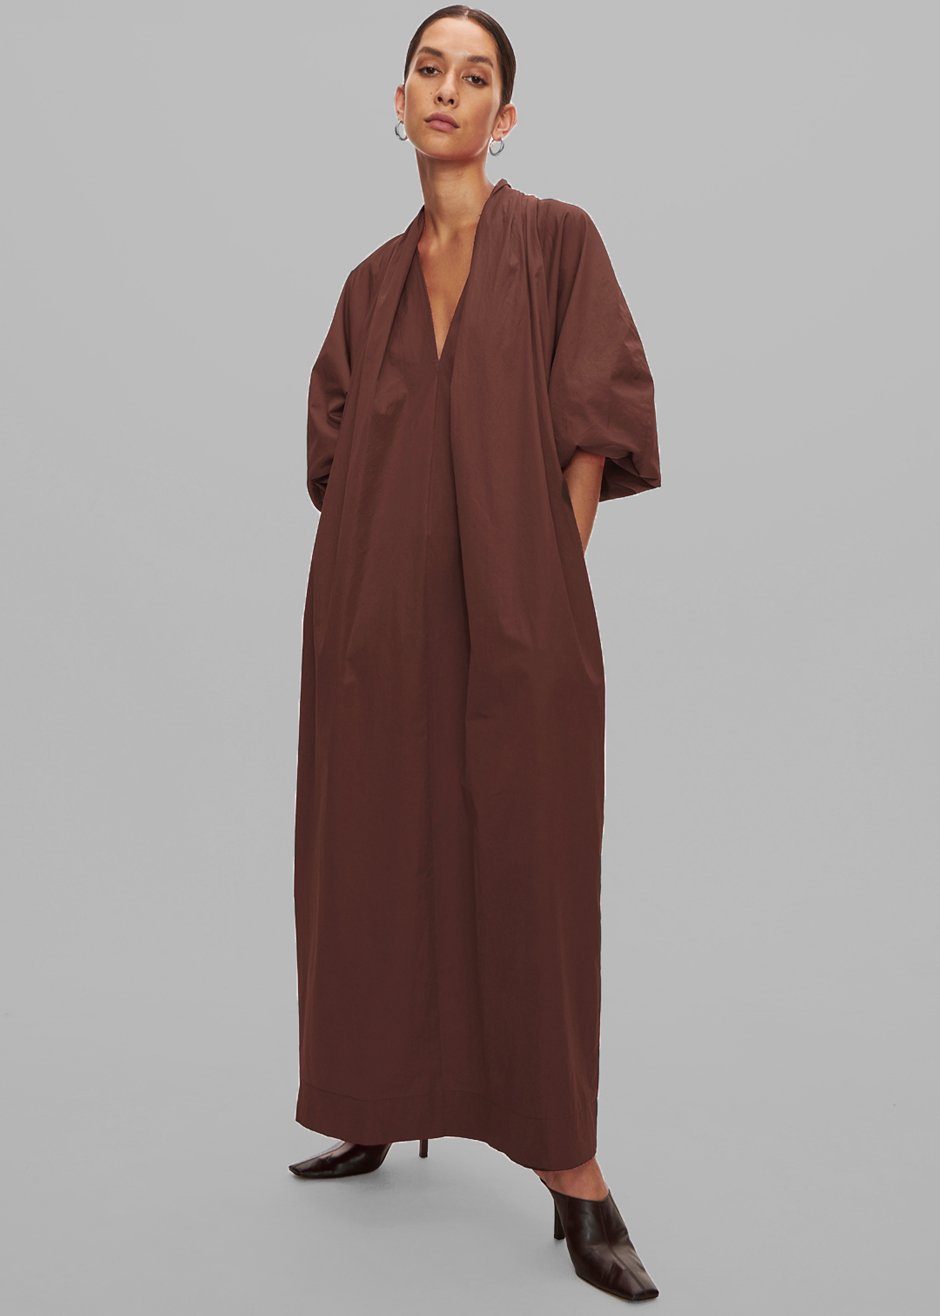 Esse Studios Collected Long Dress - Chocolate - 1